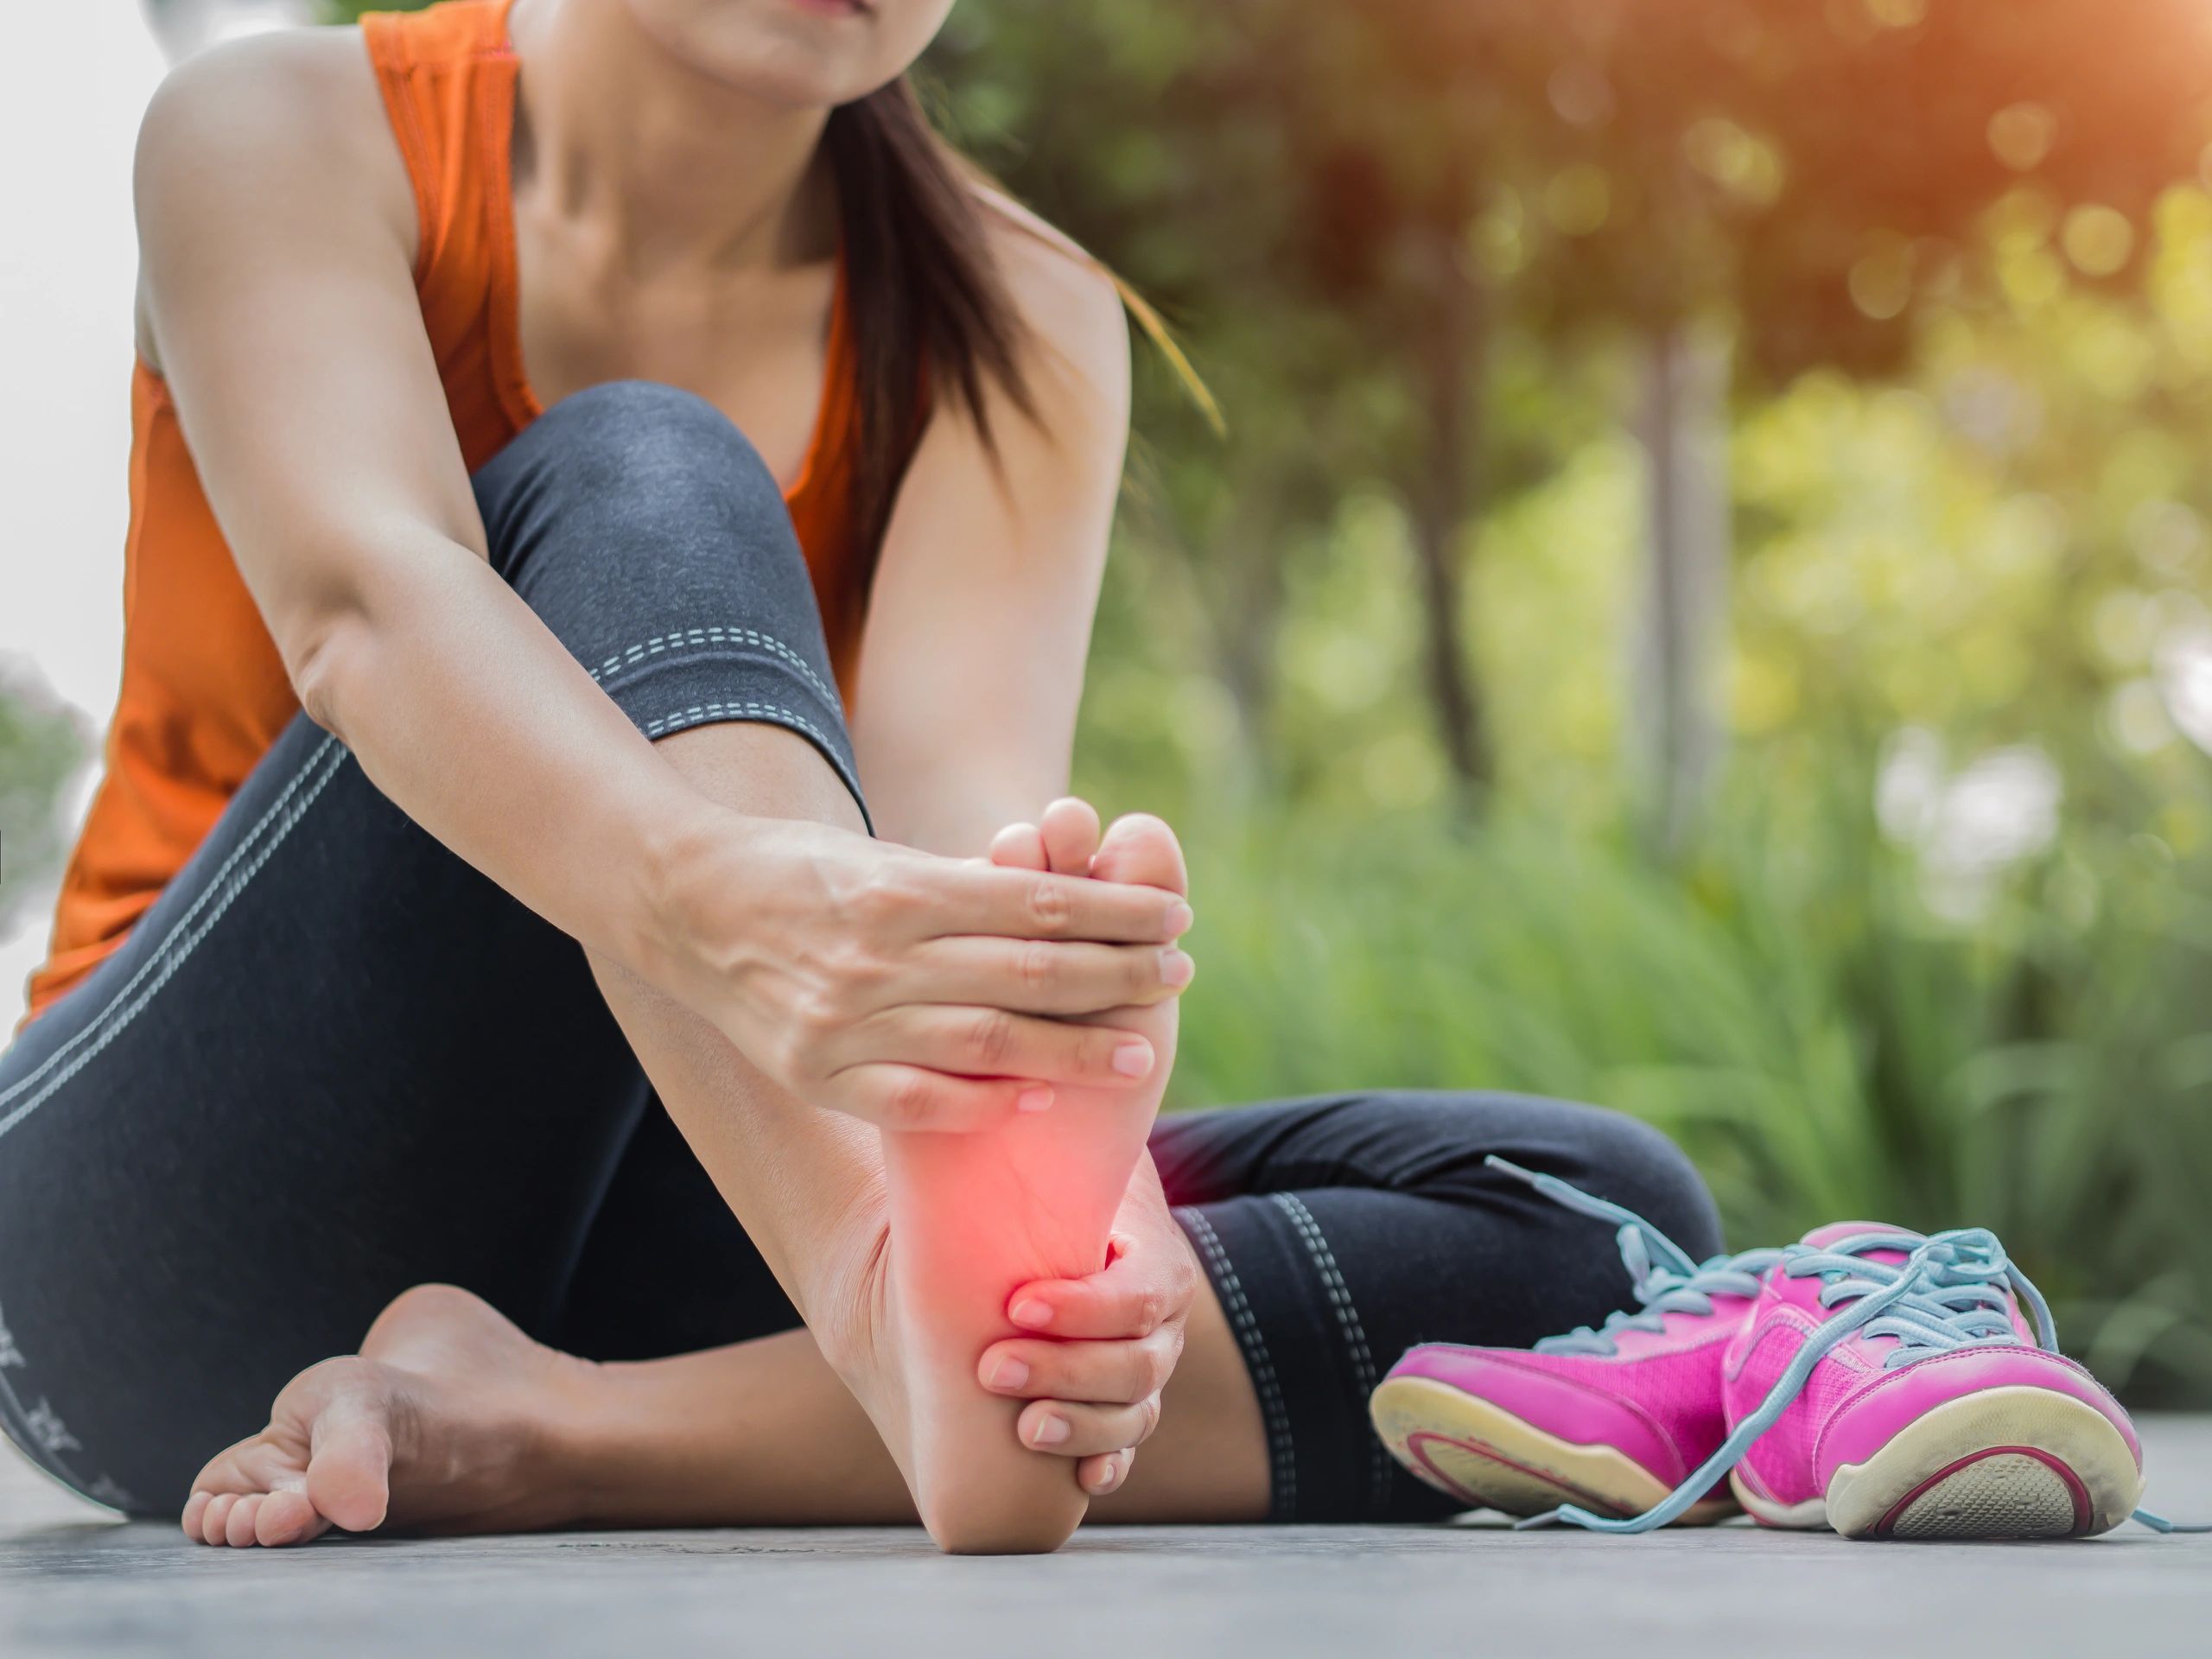 How Increased Physical Activity Can Lead to Foot Injury